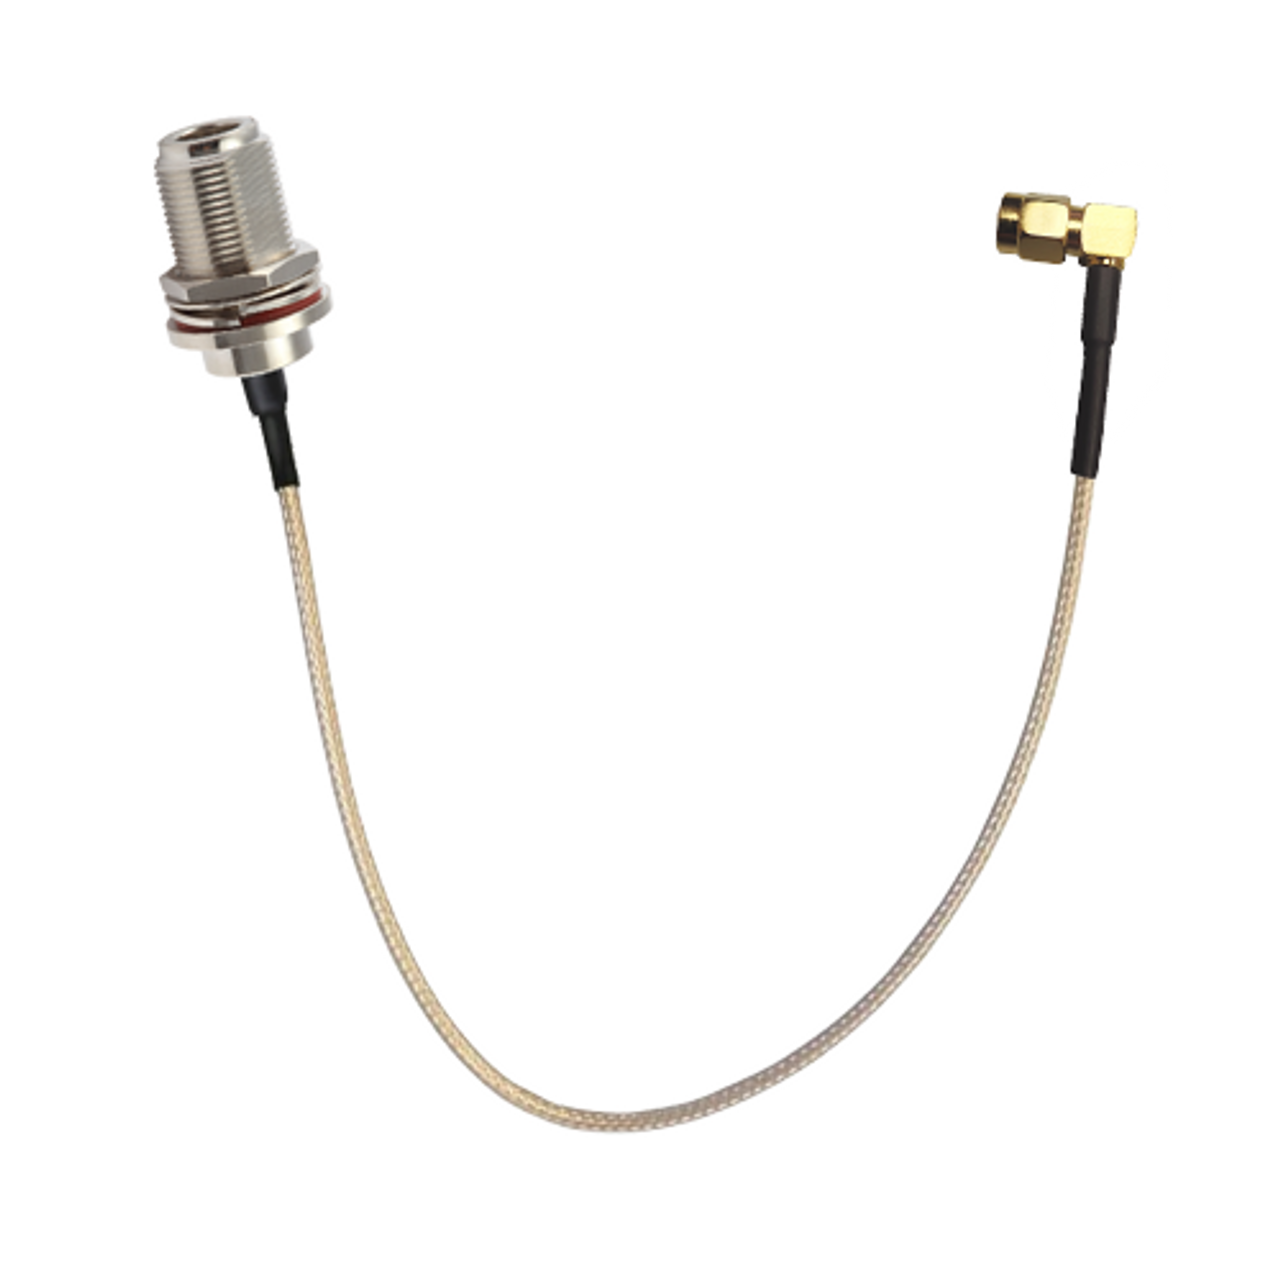 8" Adapter Cable for Inseego SKYUS-140 Gateway External Antenna (N-Female / SMA Male)